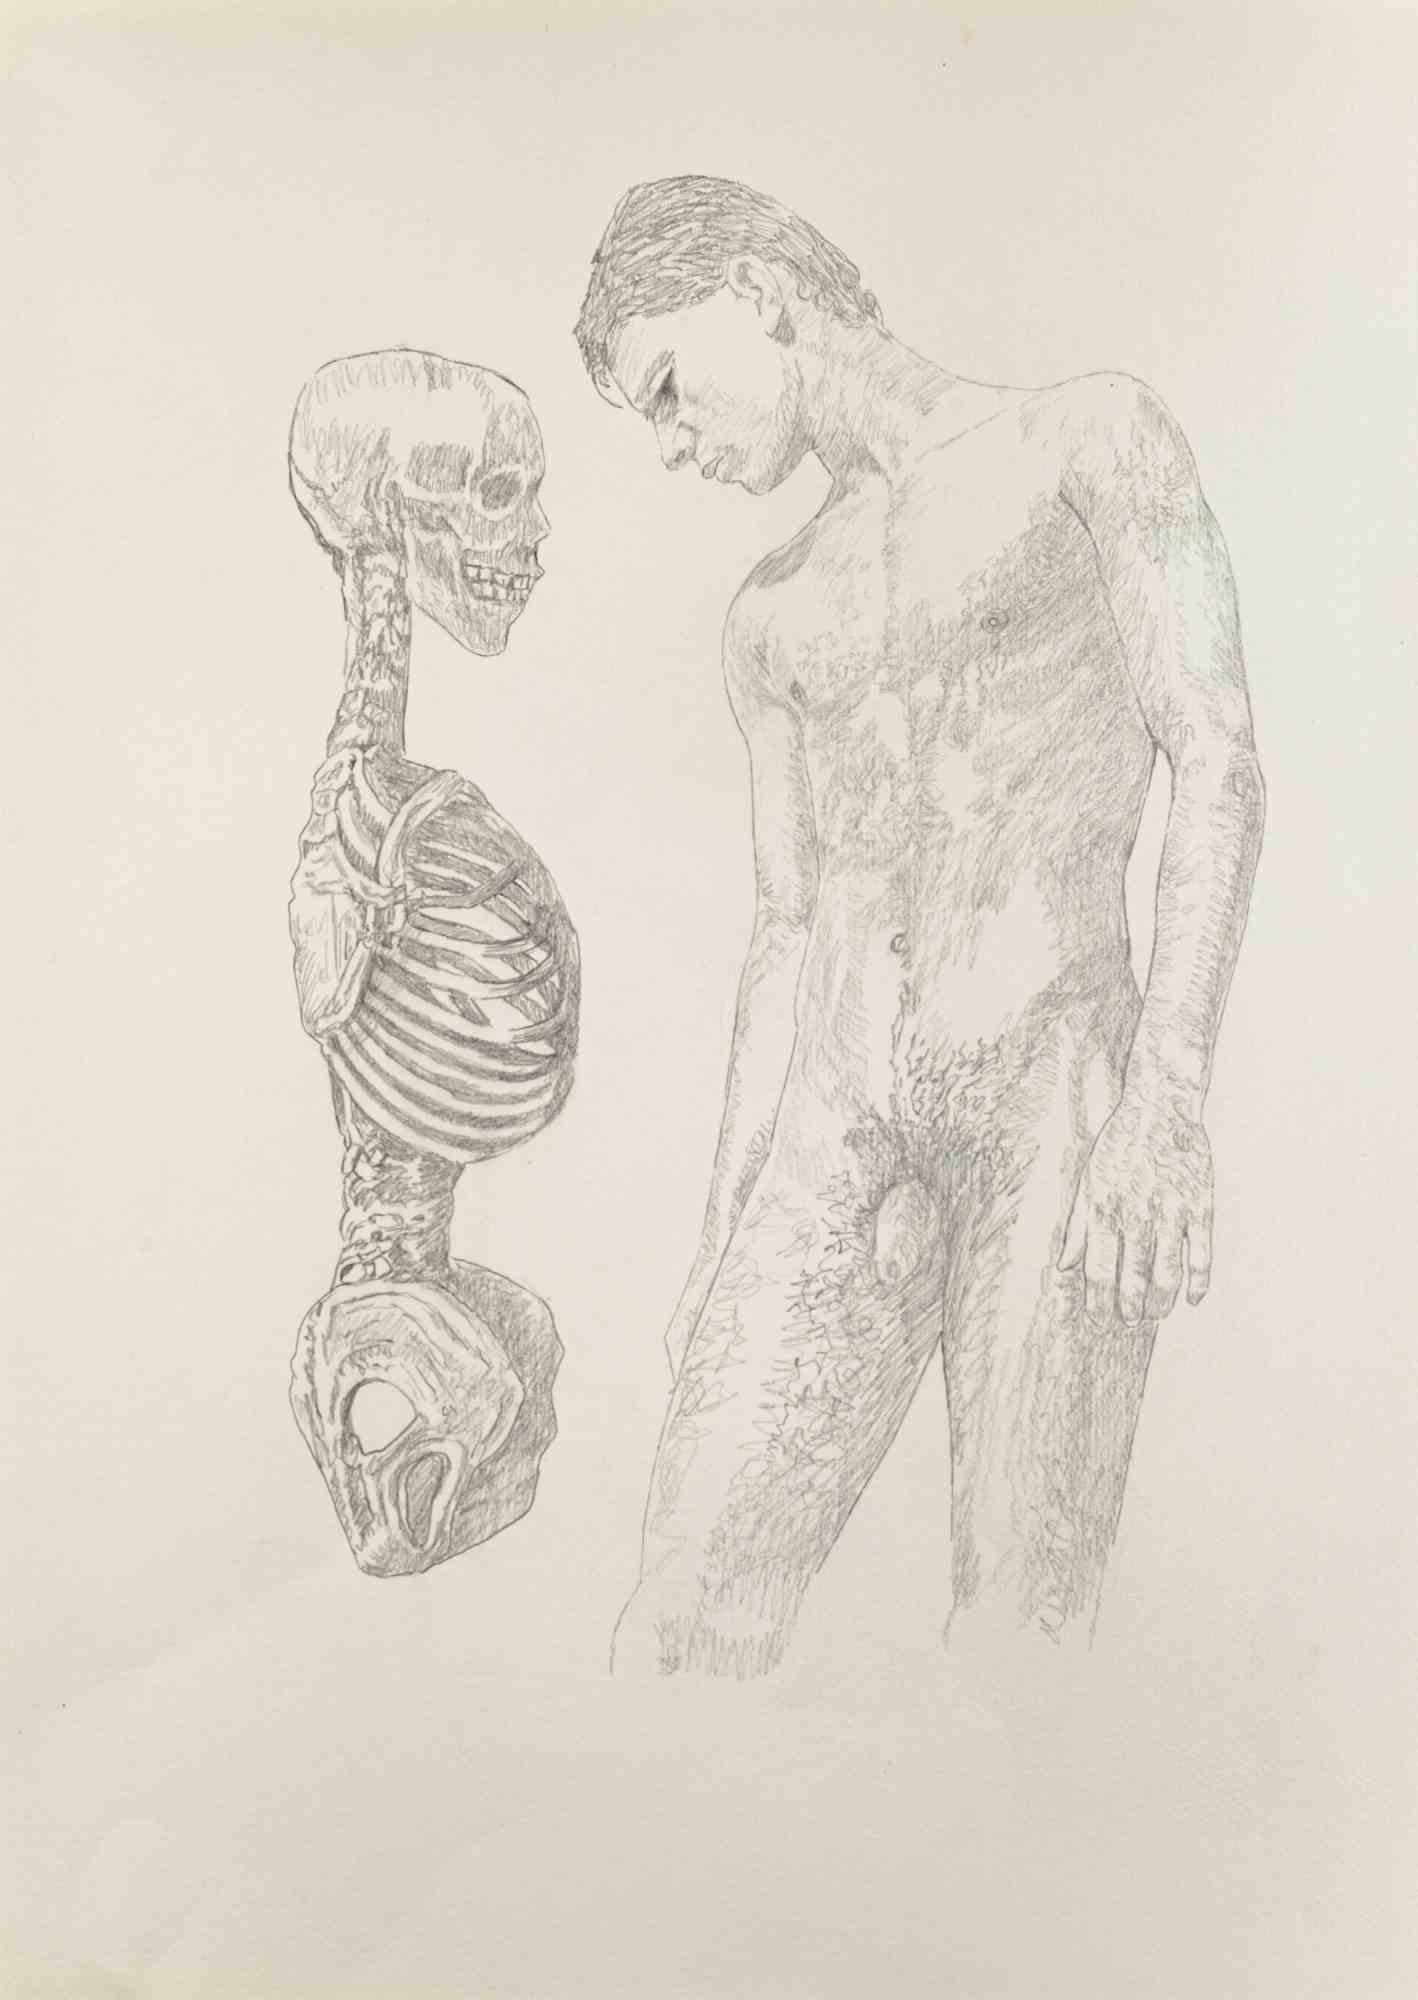 Confrontation - Pencil Drawing by Anthony Roaland - 1989